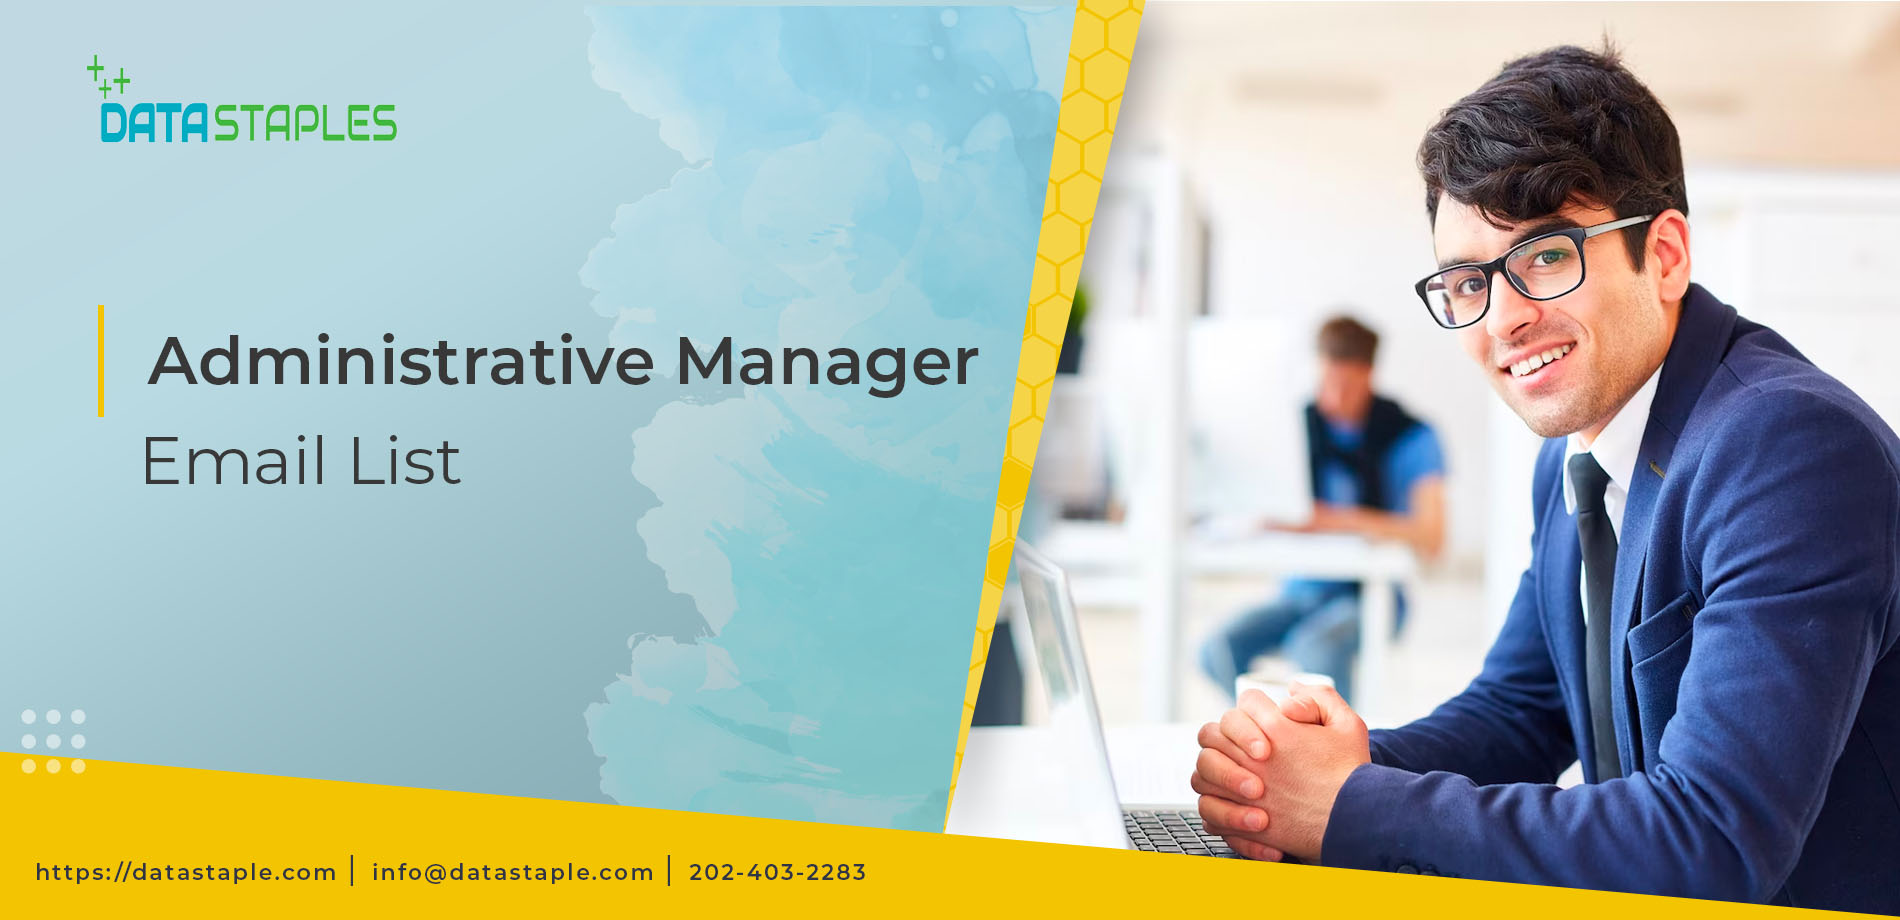 Administrative Manager Email List | DataStaples